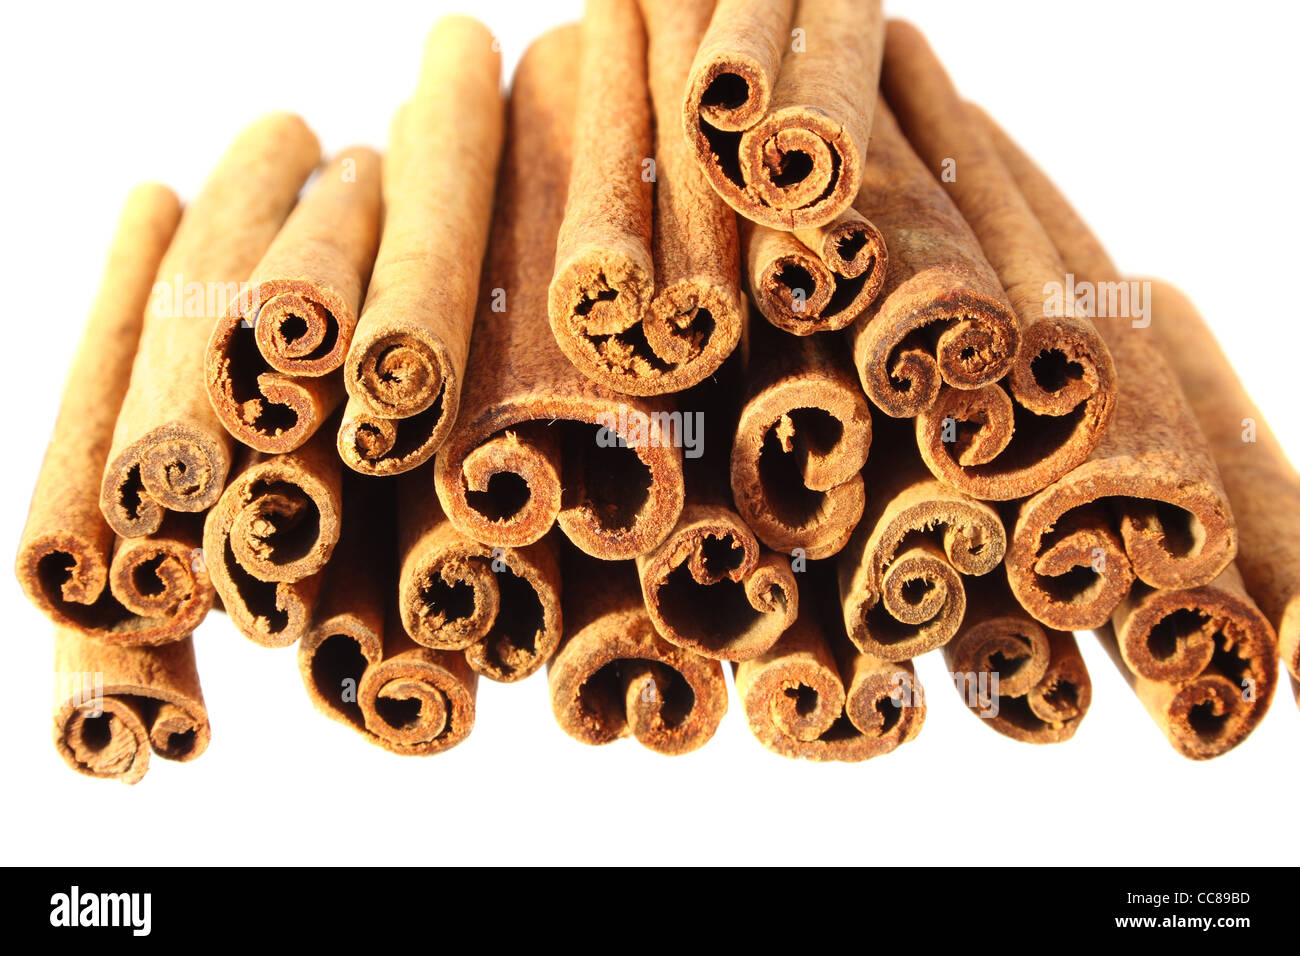 end on view of a pile of cinnamon sticks isolated on white with shallow depth of field Stock Photo